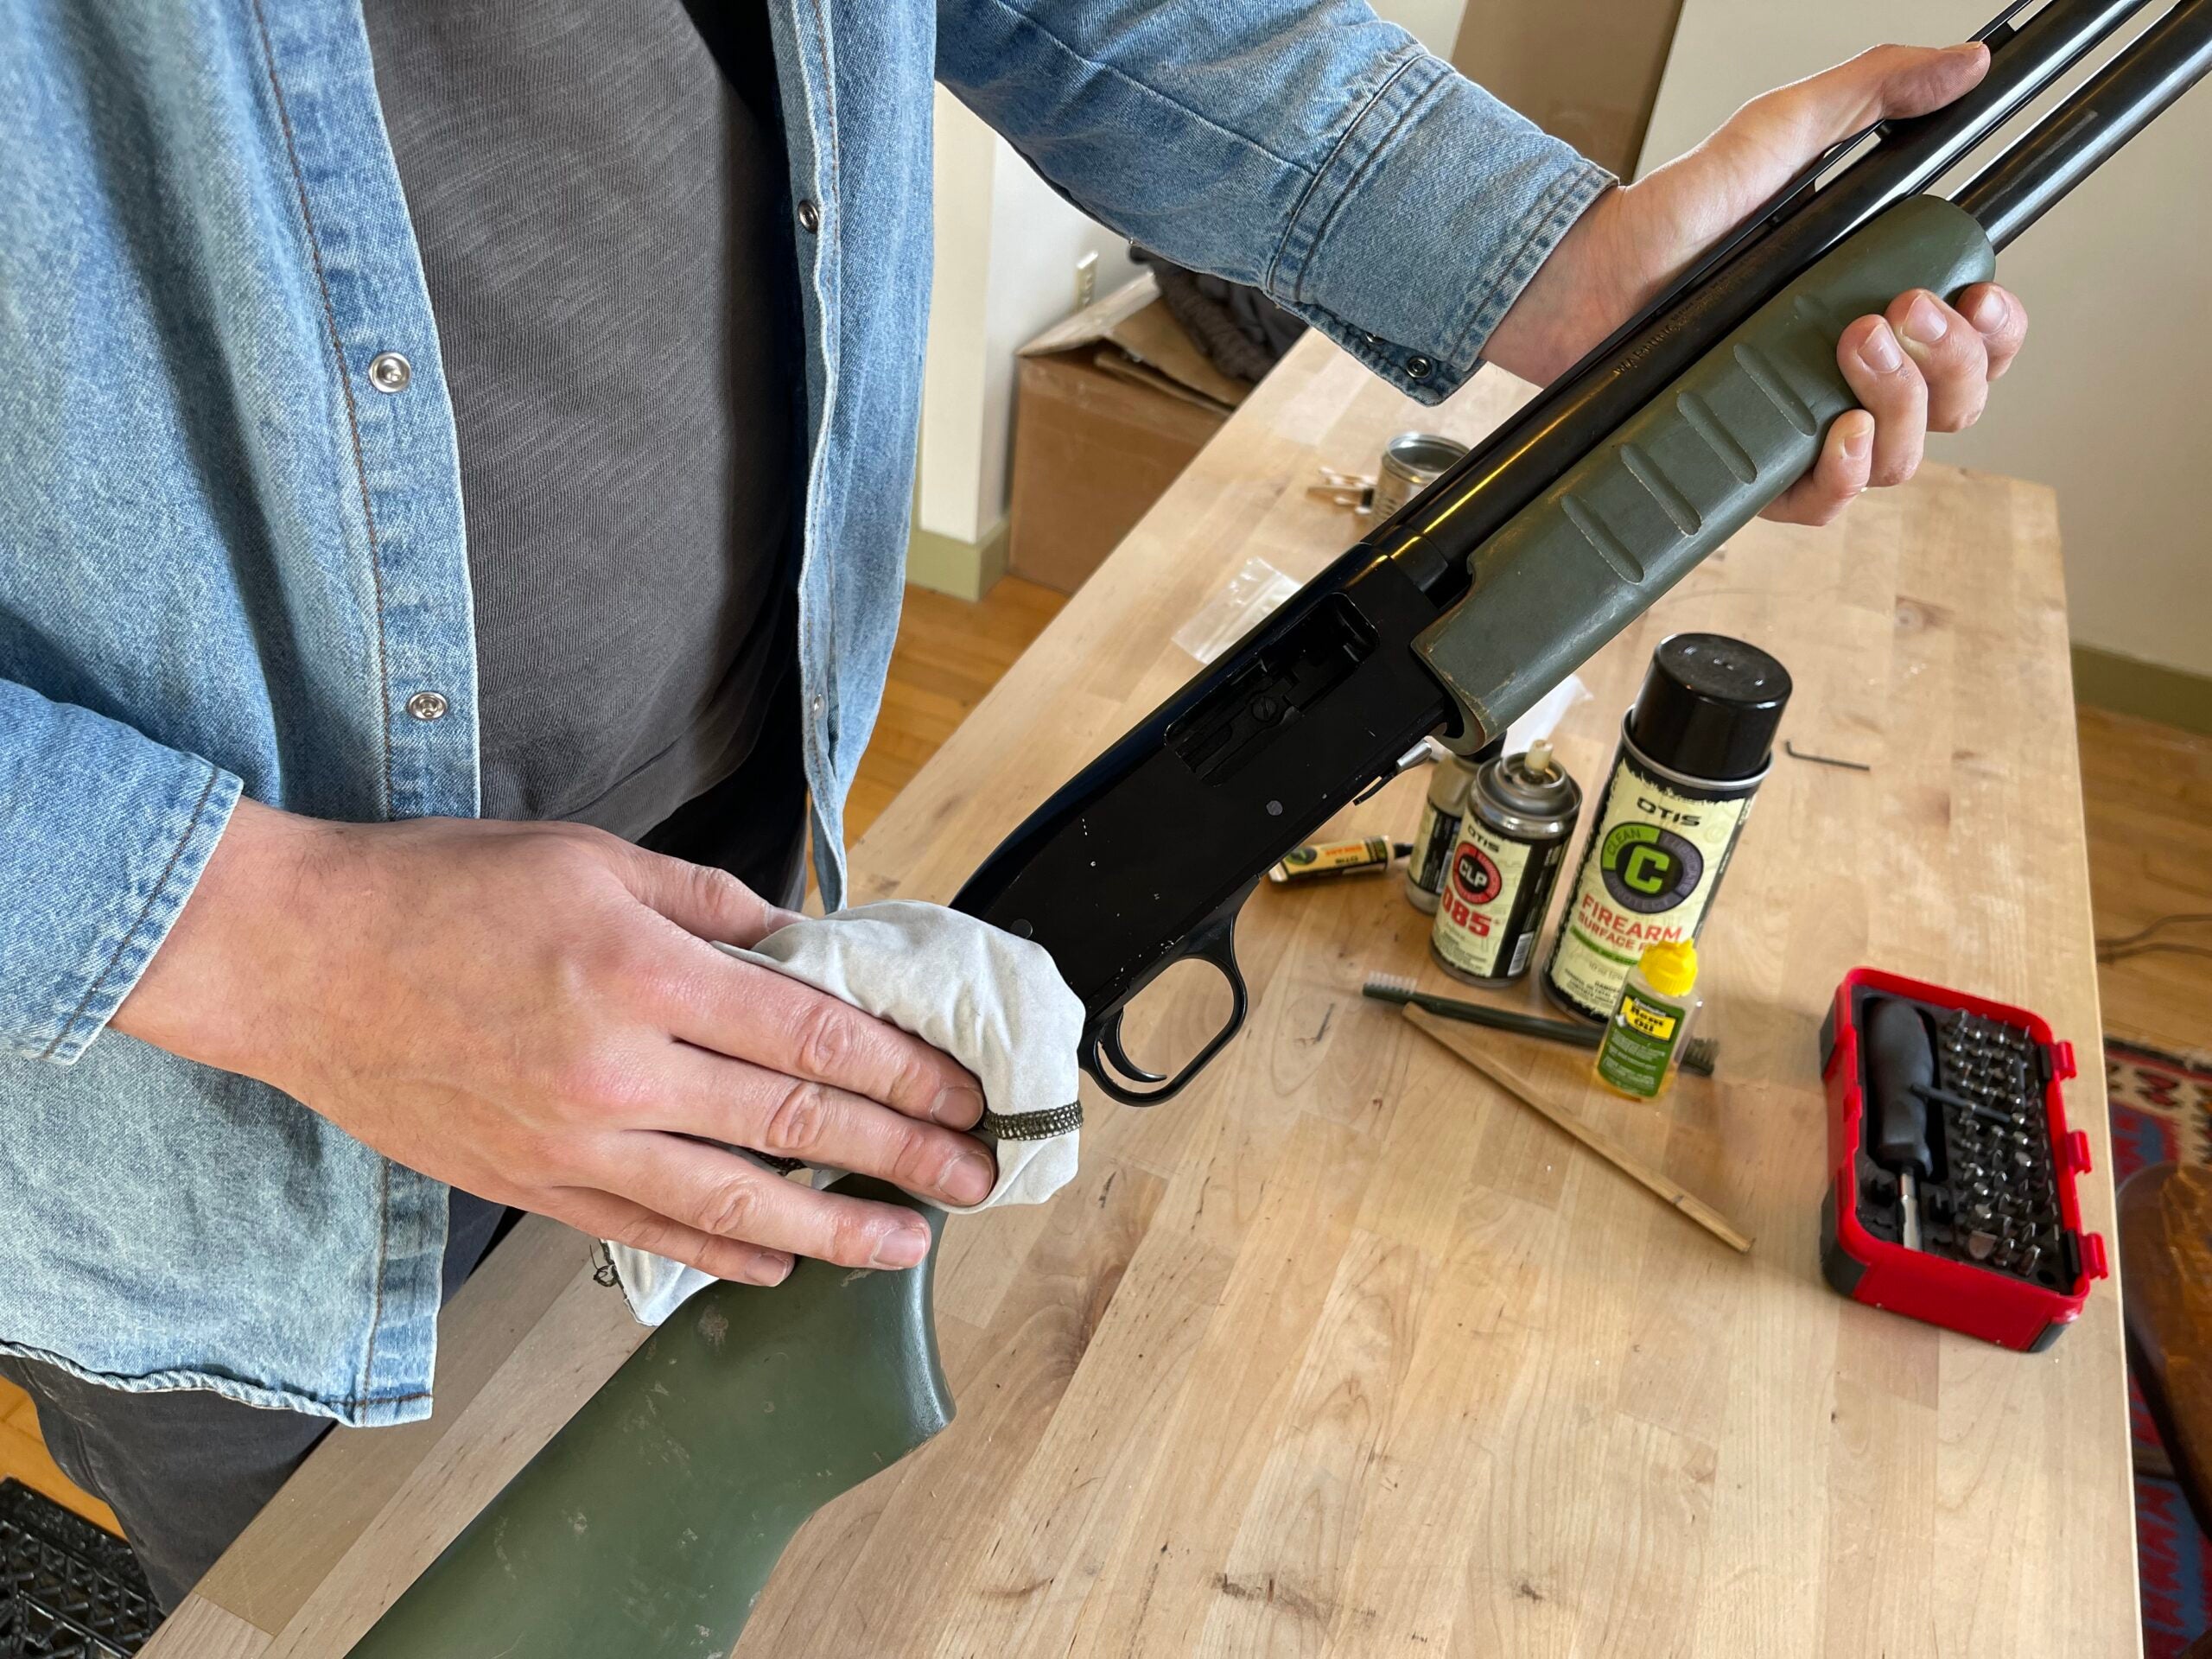 Showing how to clean a shotgun.